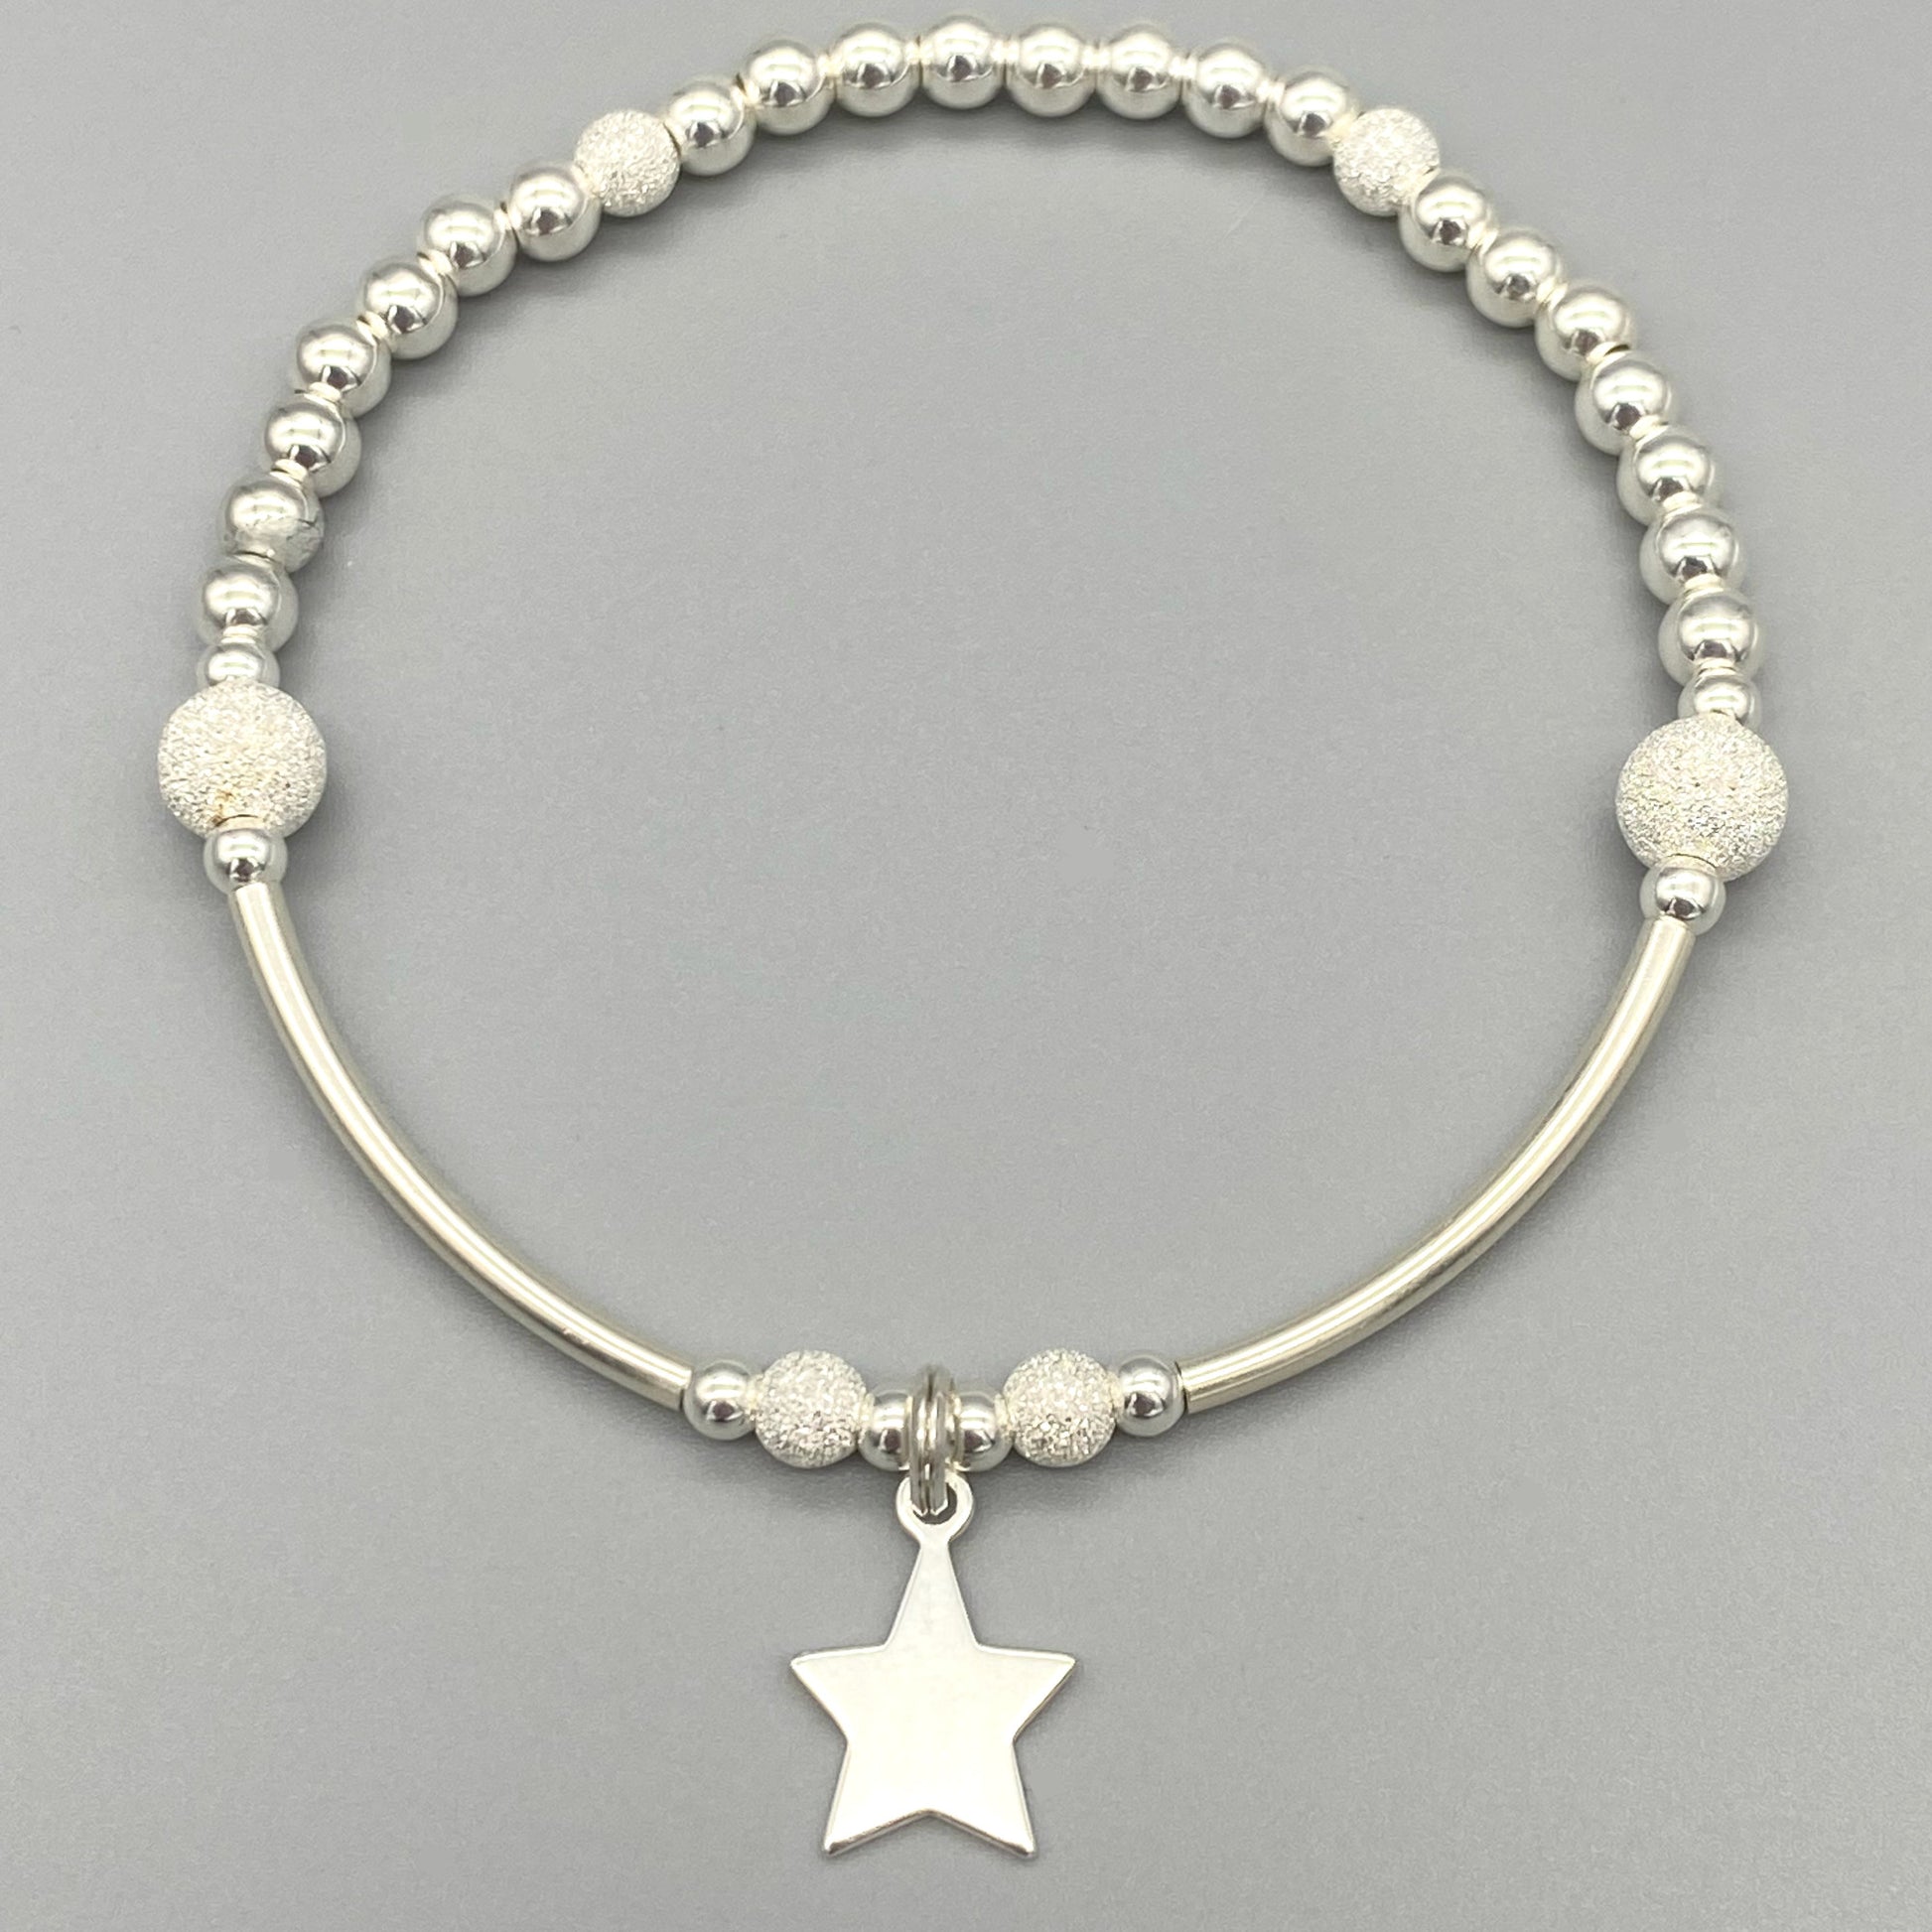 Star charm & starburst beads sterling silver stacking bracelet for her by My Silver Wish